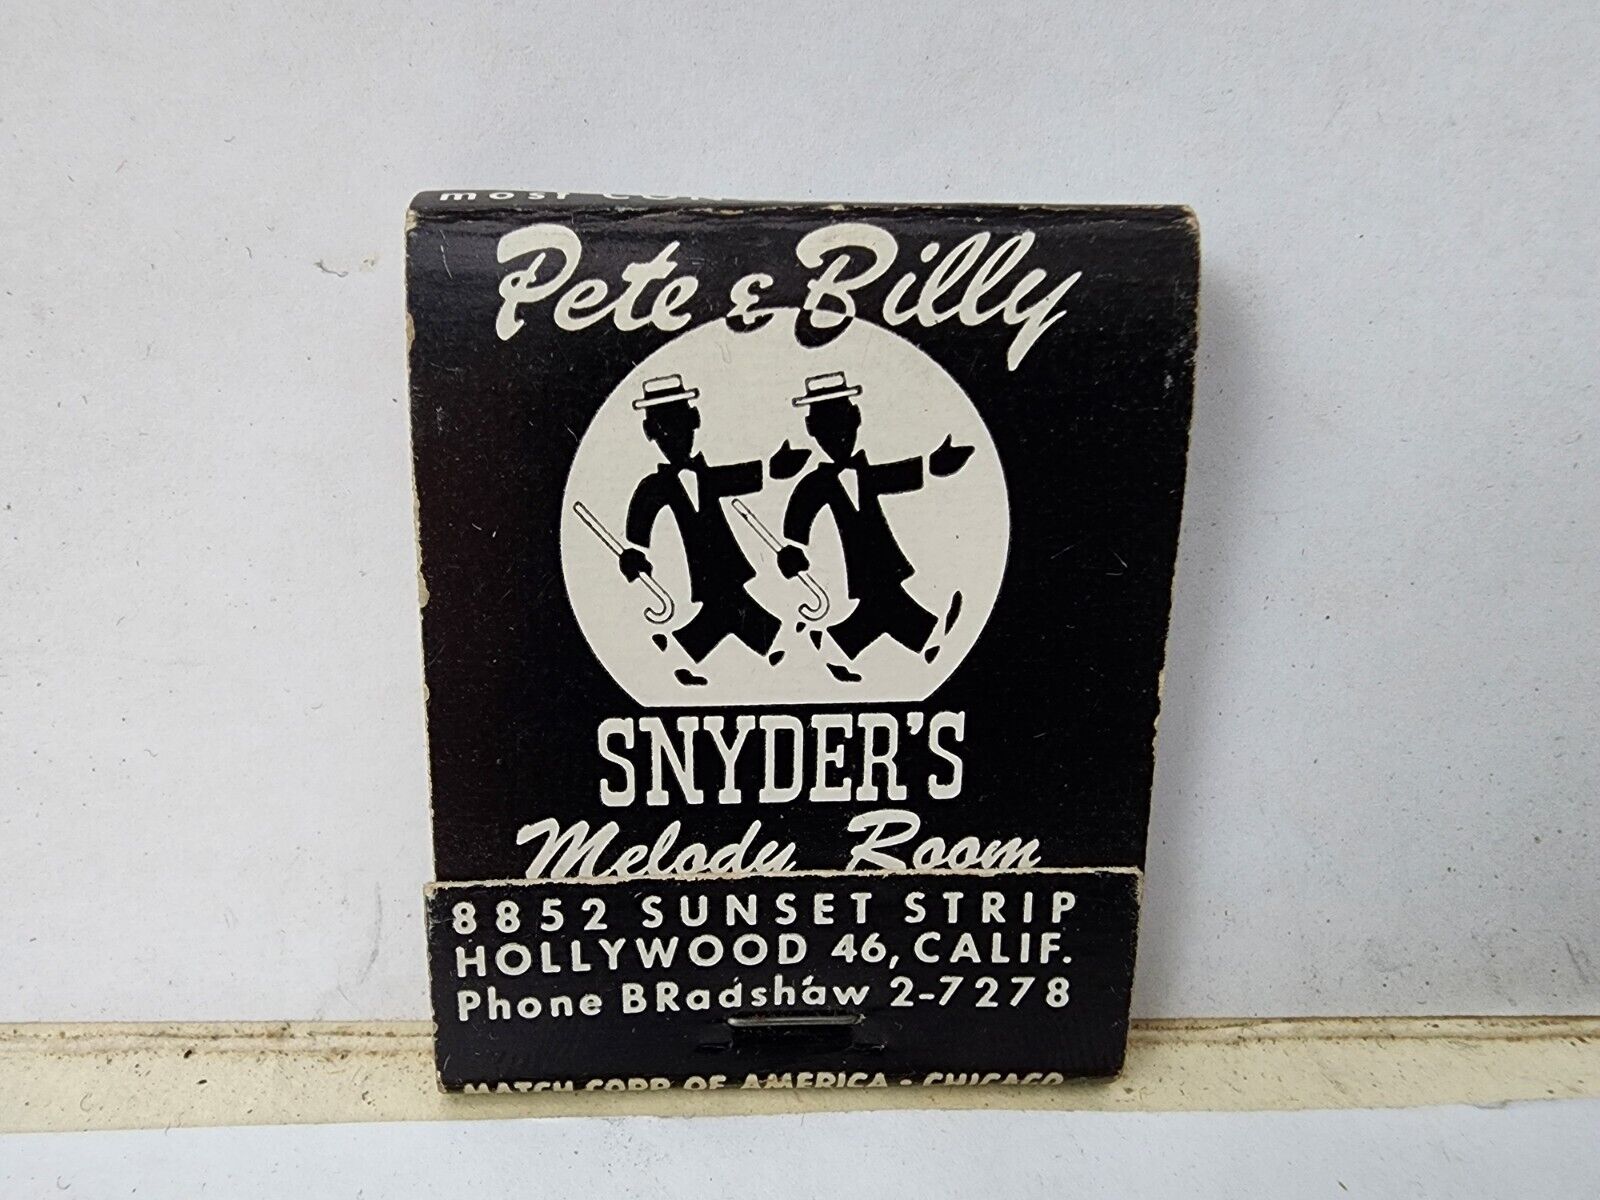 Rare Vintage Matchbook Cover - Pete & Billy Snyder\'s Melody Room Hollywood Viper